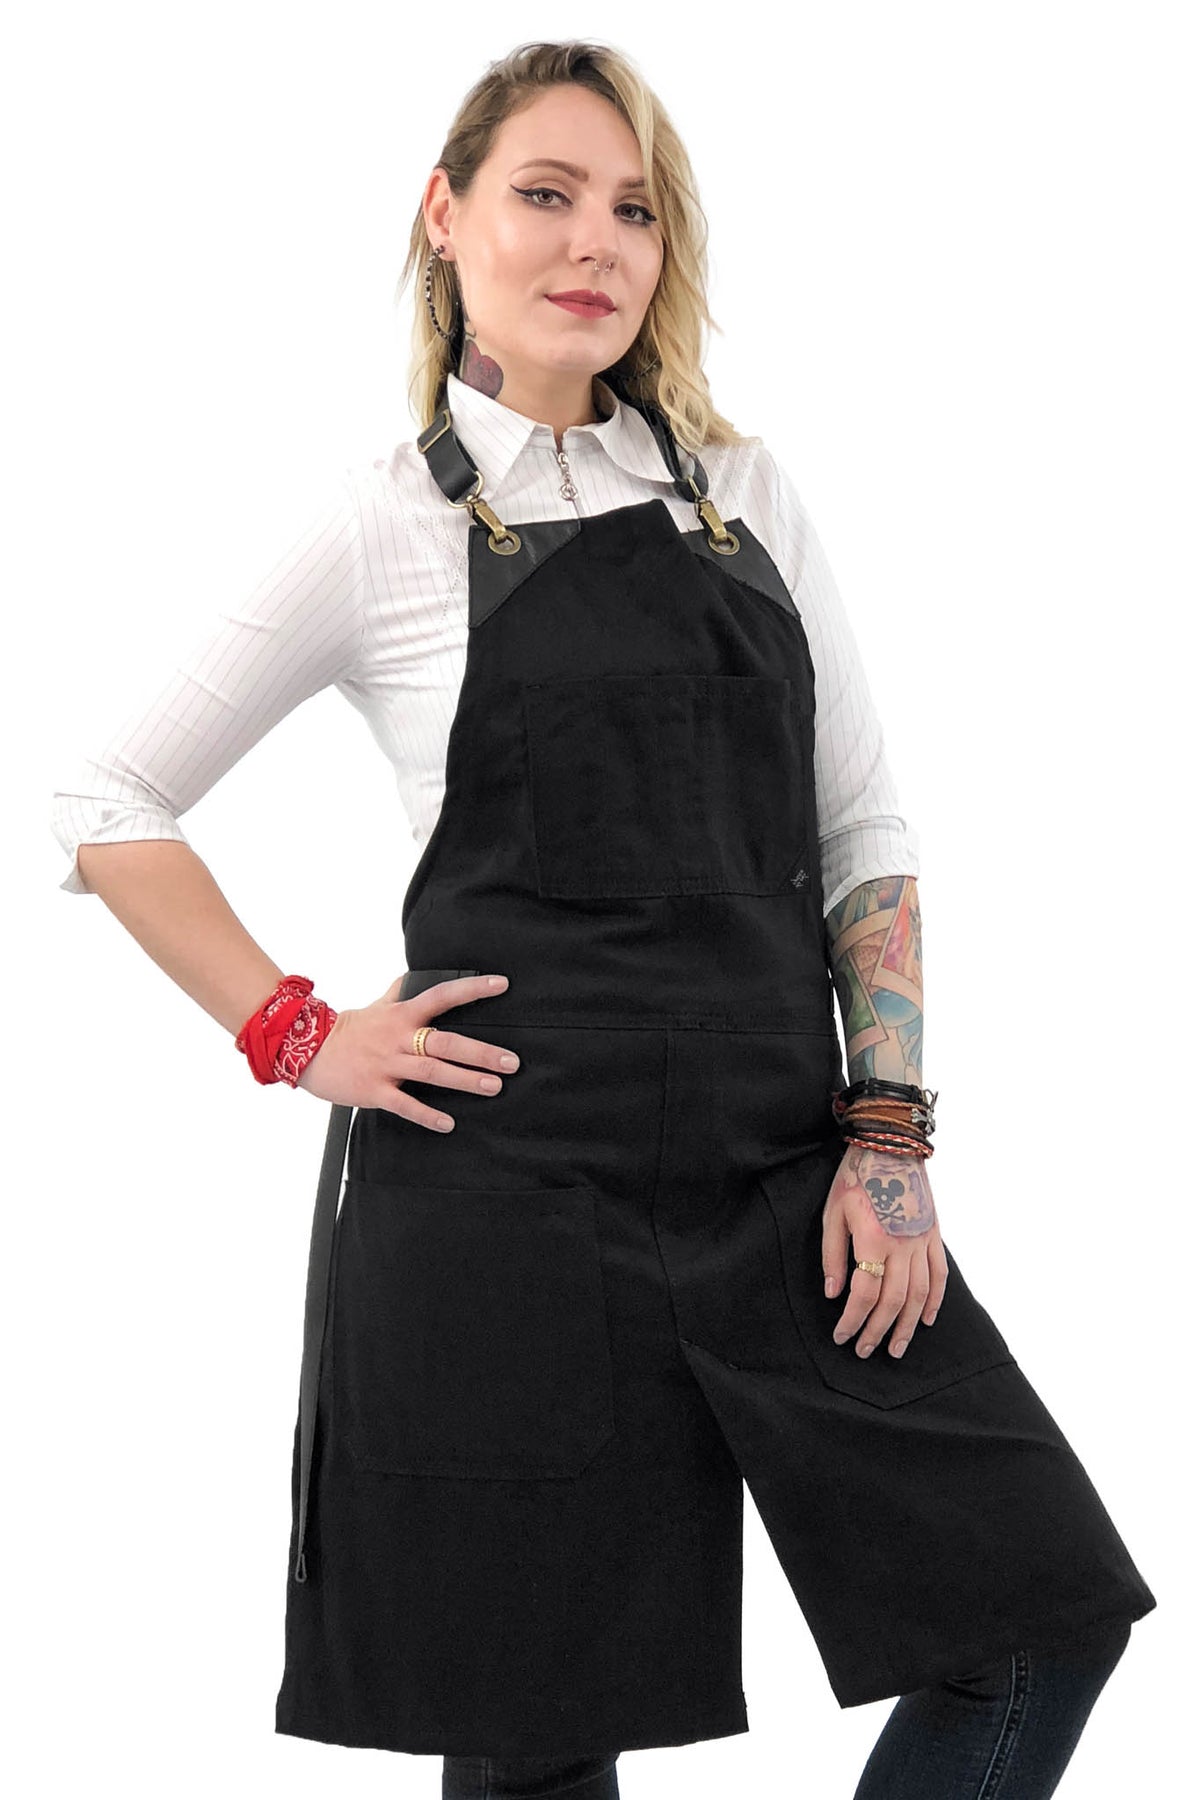 Leather Straps Apron - Twill - Easy-Fastening No-Tie - Chef, Bartender, Shop, Barista  -  Under NY Sky